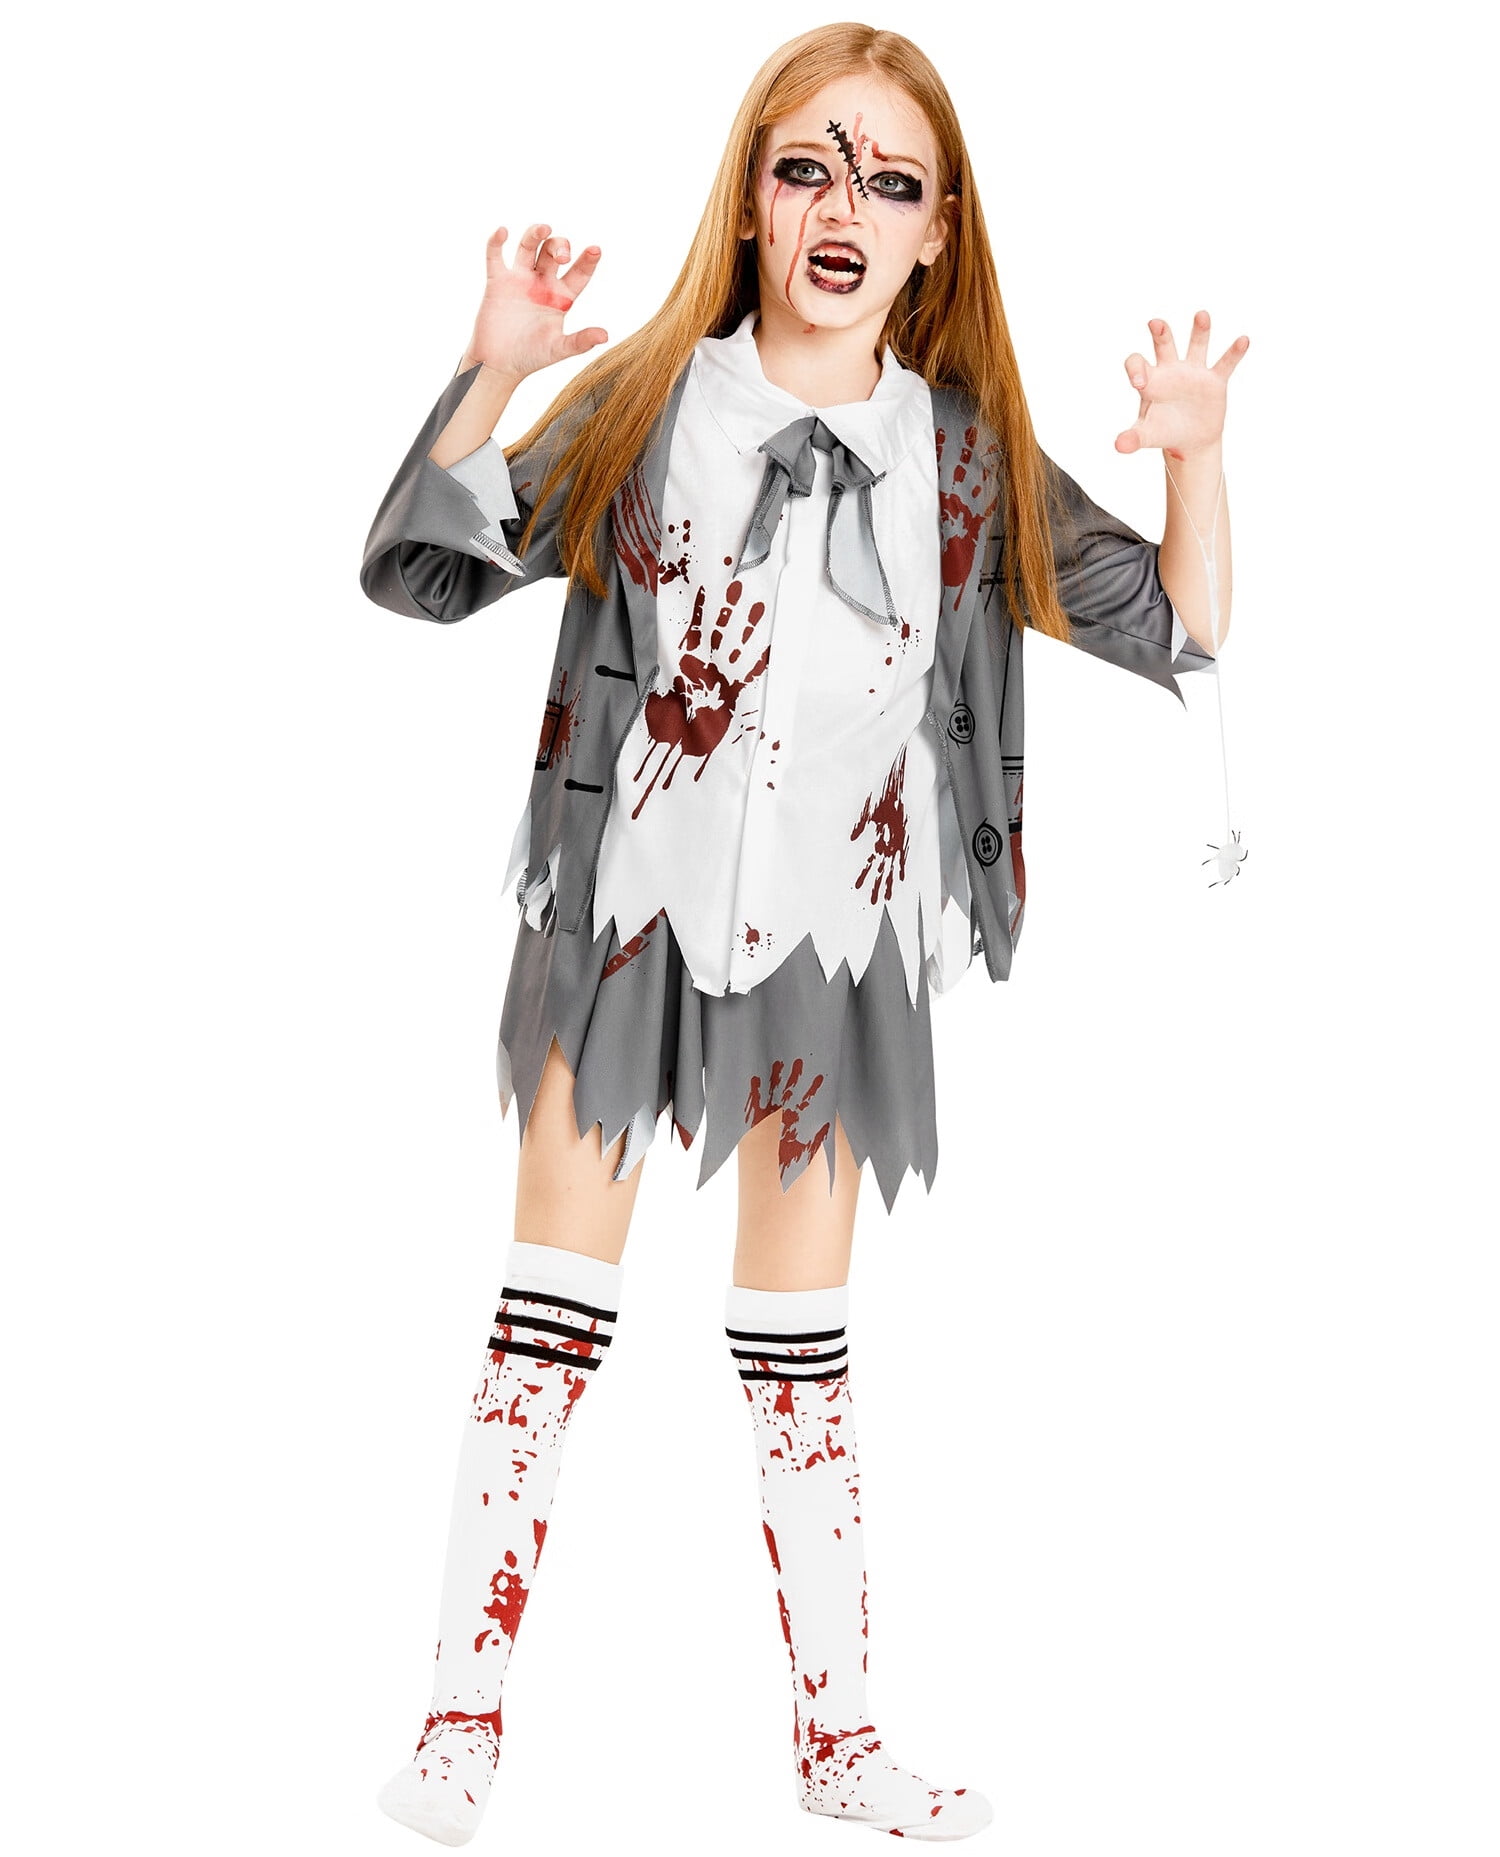 Teen girl in costume zombi. Concept of death on Halloween party